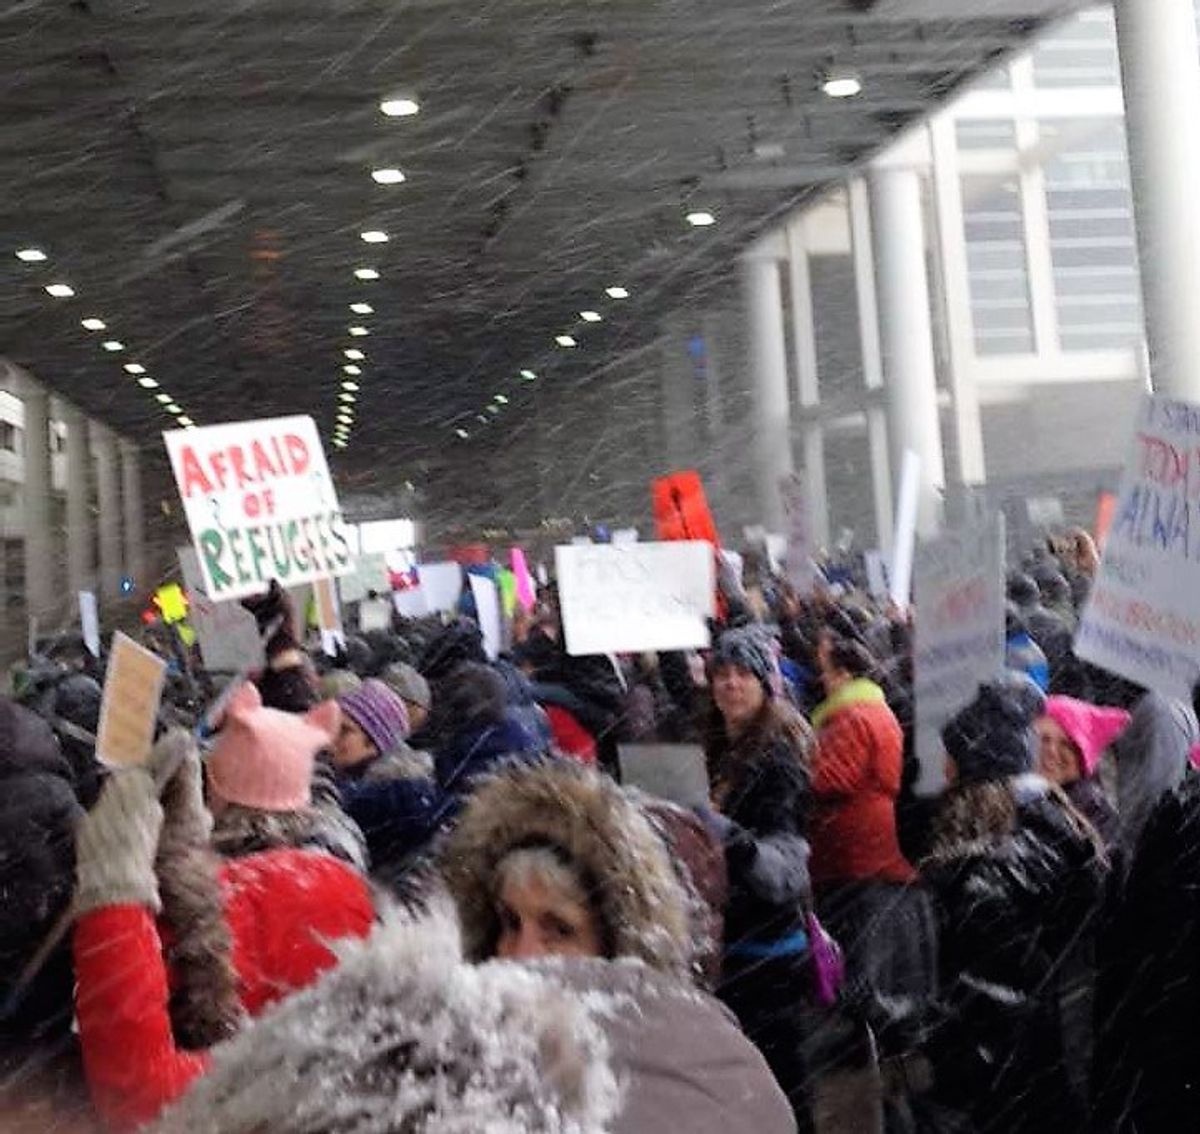 "You are welcome here," Shout Protesters at Detroit Metropolitan Airport